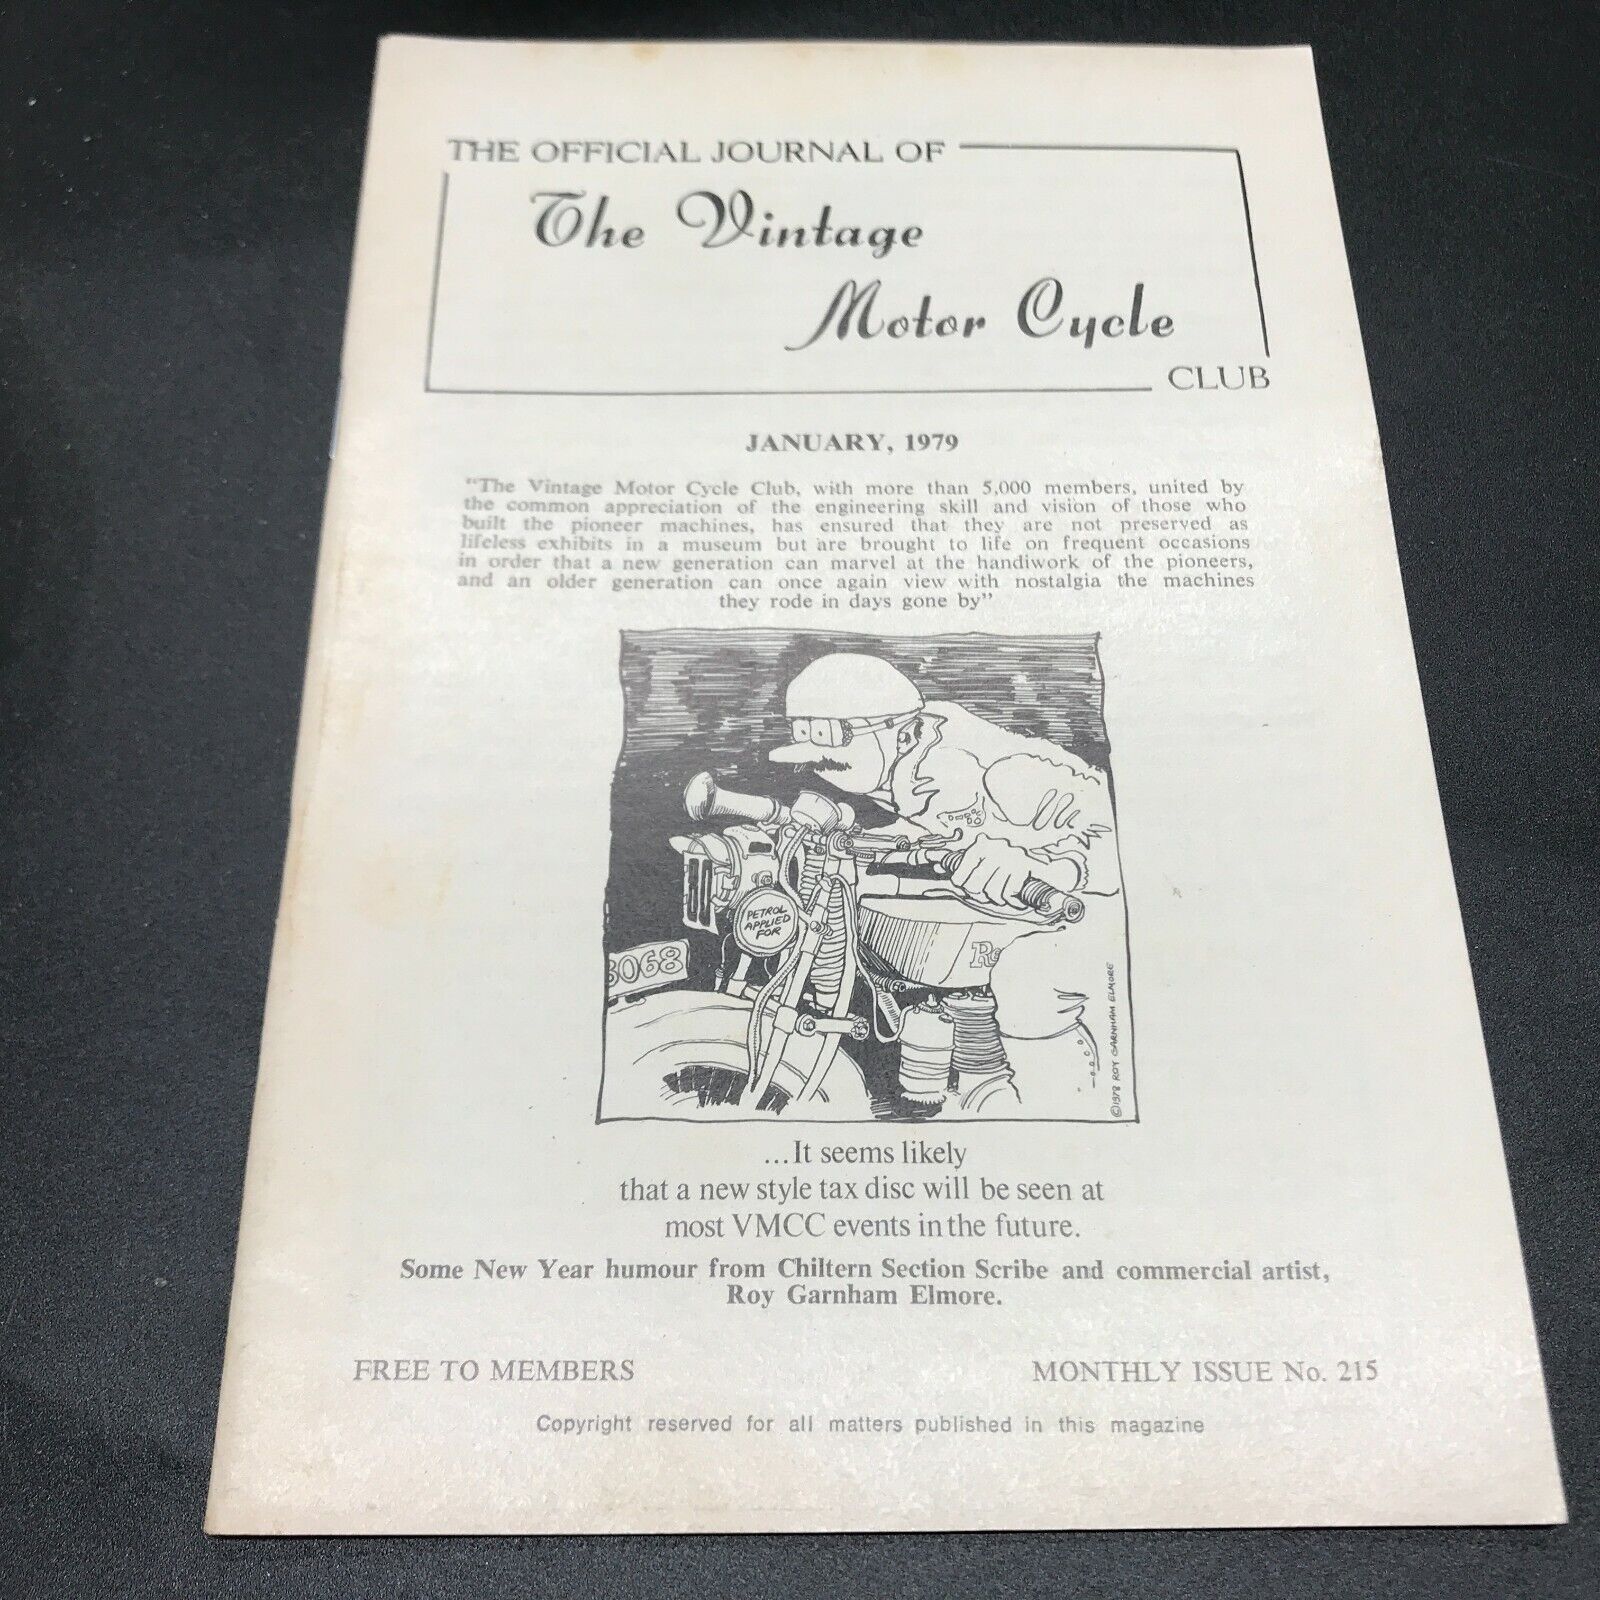 THE OFFICIAL JOURNAL THE VINTAGE MOTORCYCLE CLUB MAGAZINE JANUARY 1979